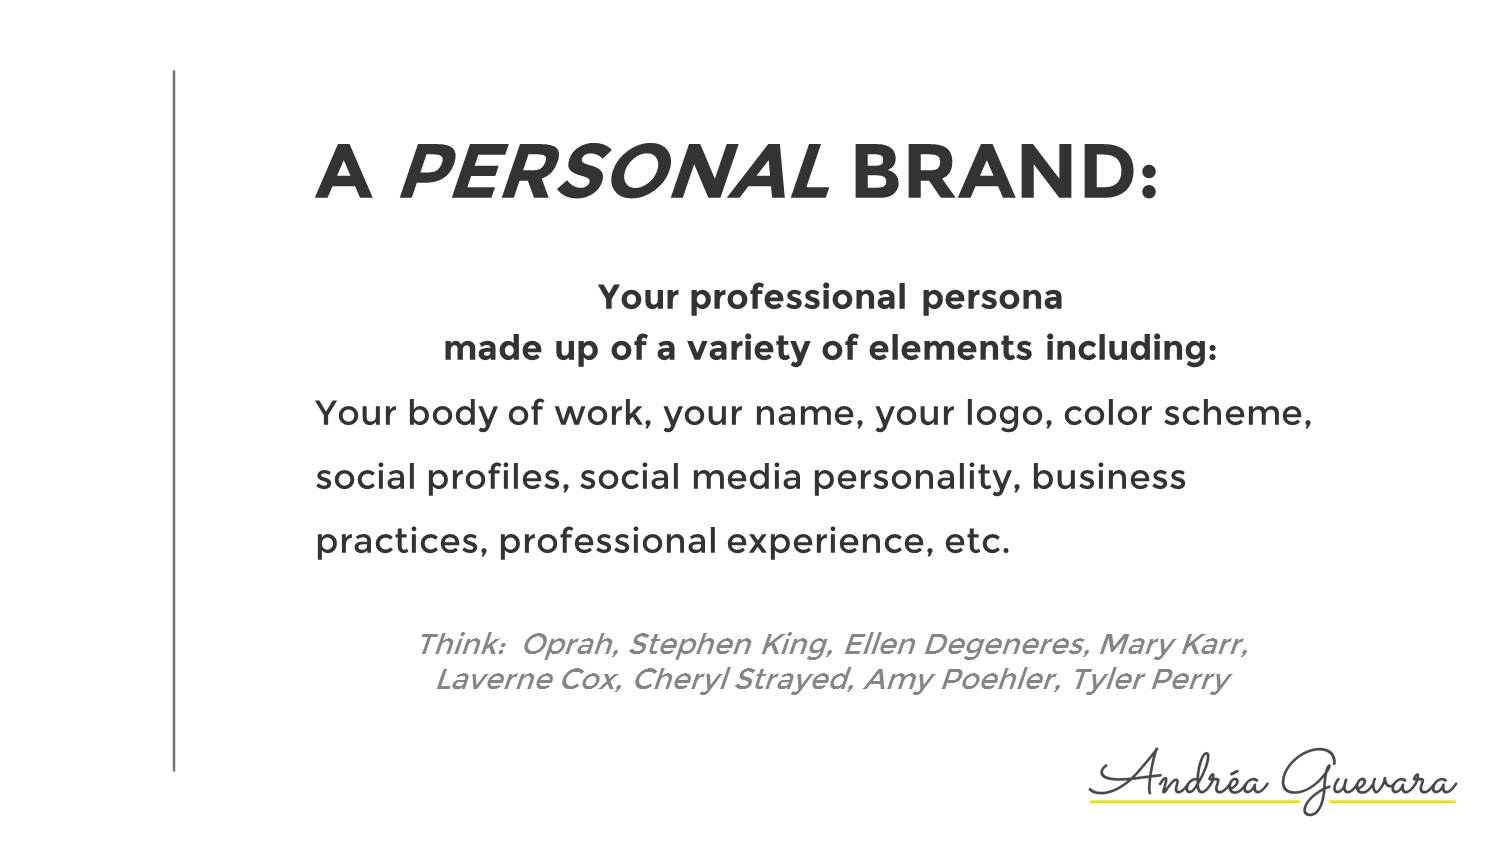 Personal Brand definition: Your professional persona made up of a variety of elements.